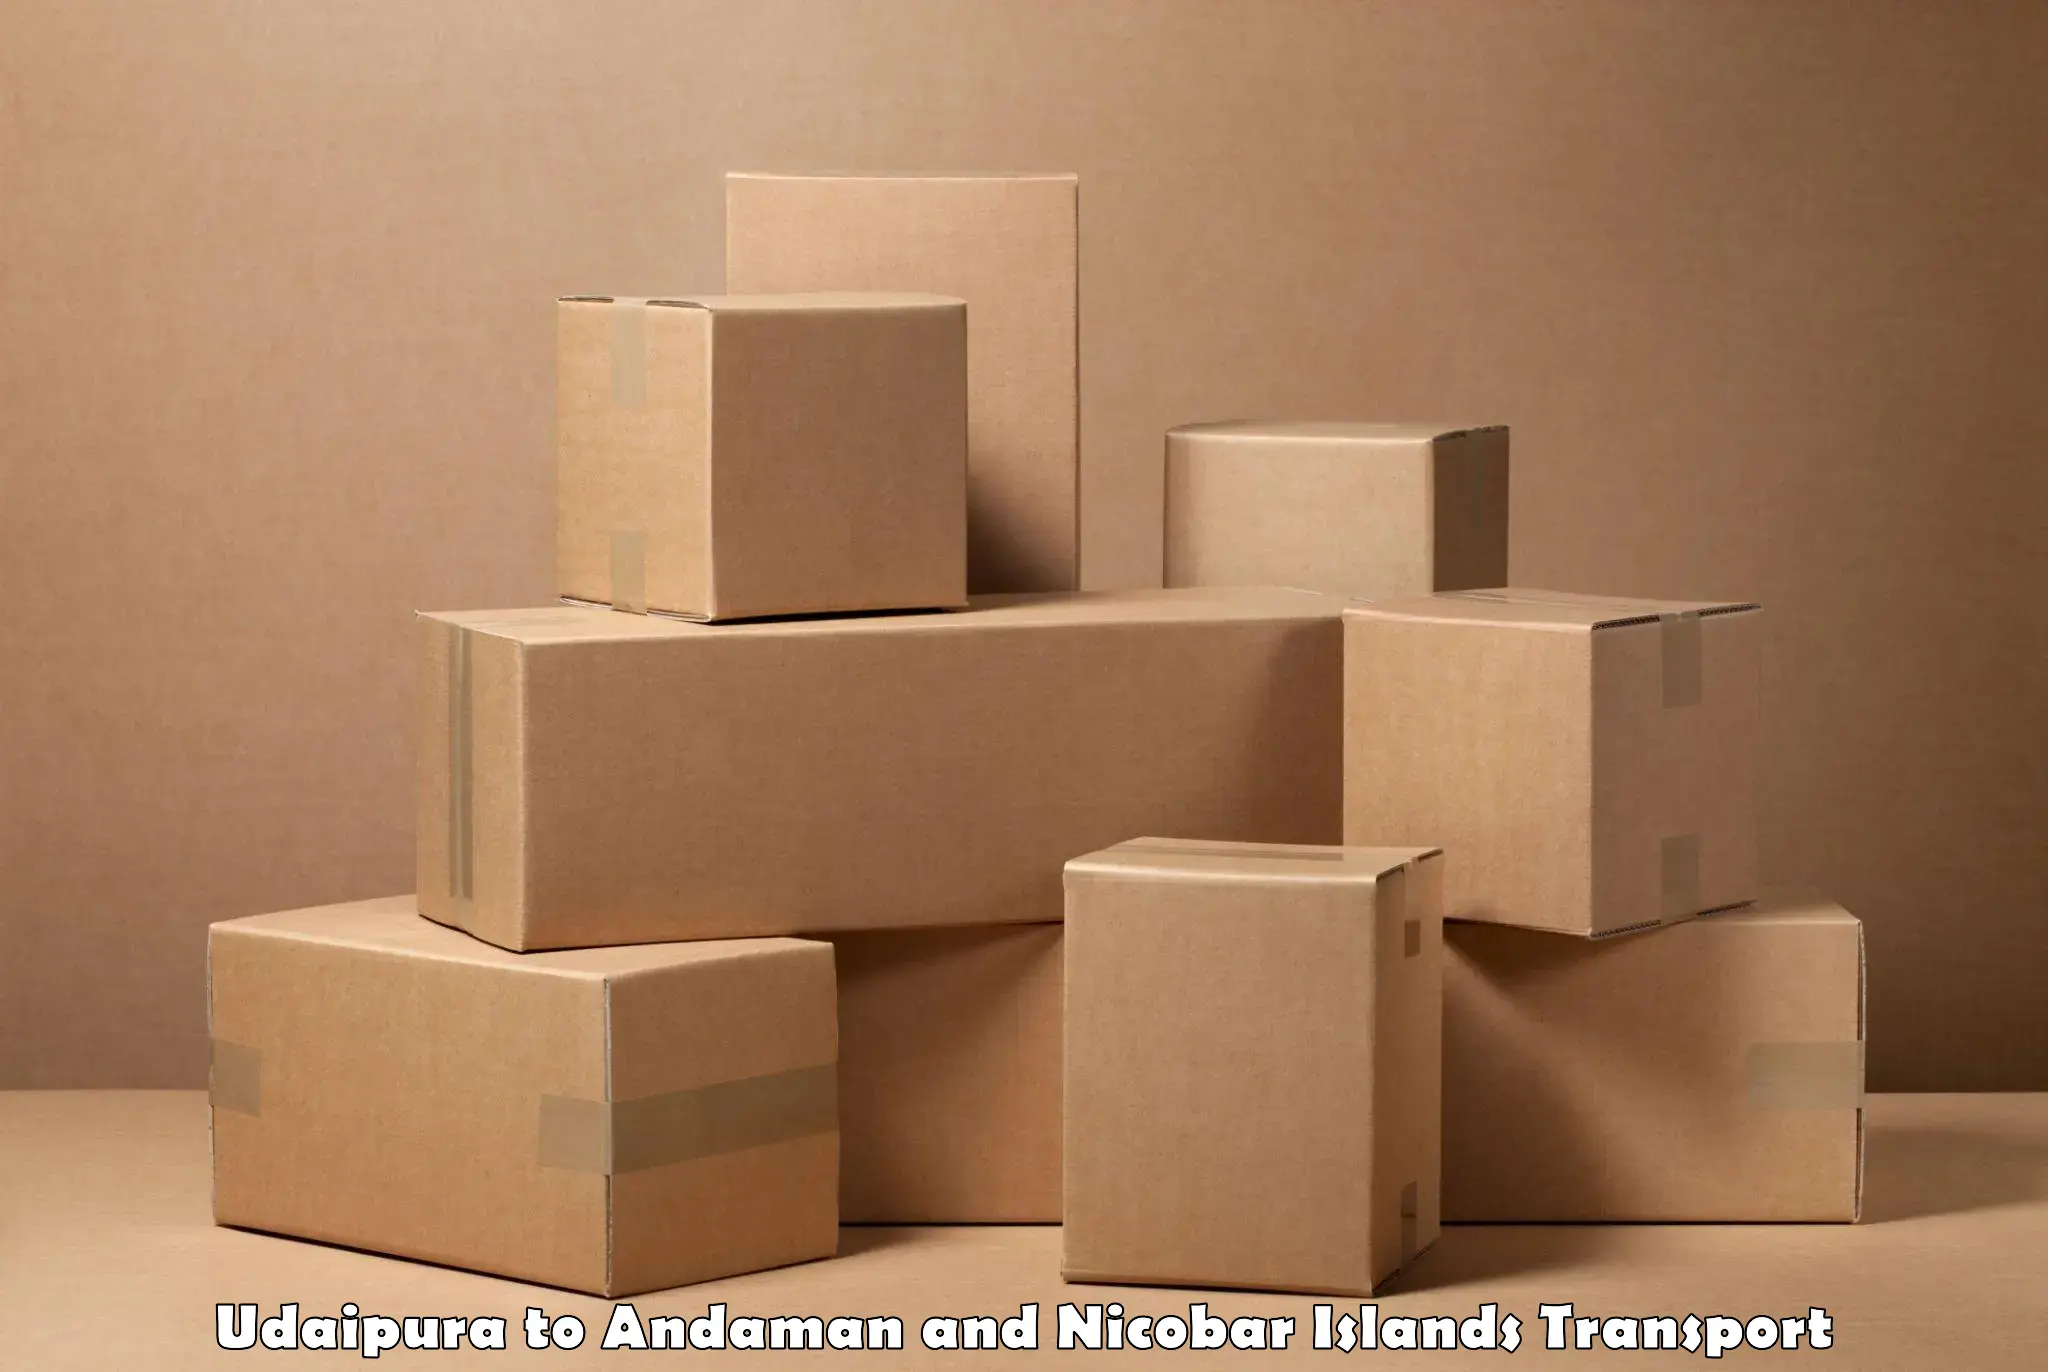 Parcel transport services in Udaipura to Andaman and Nicobar Islands